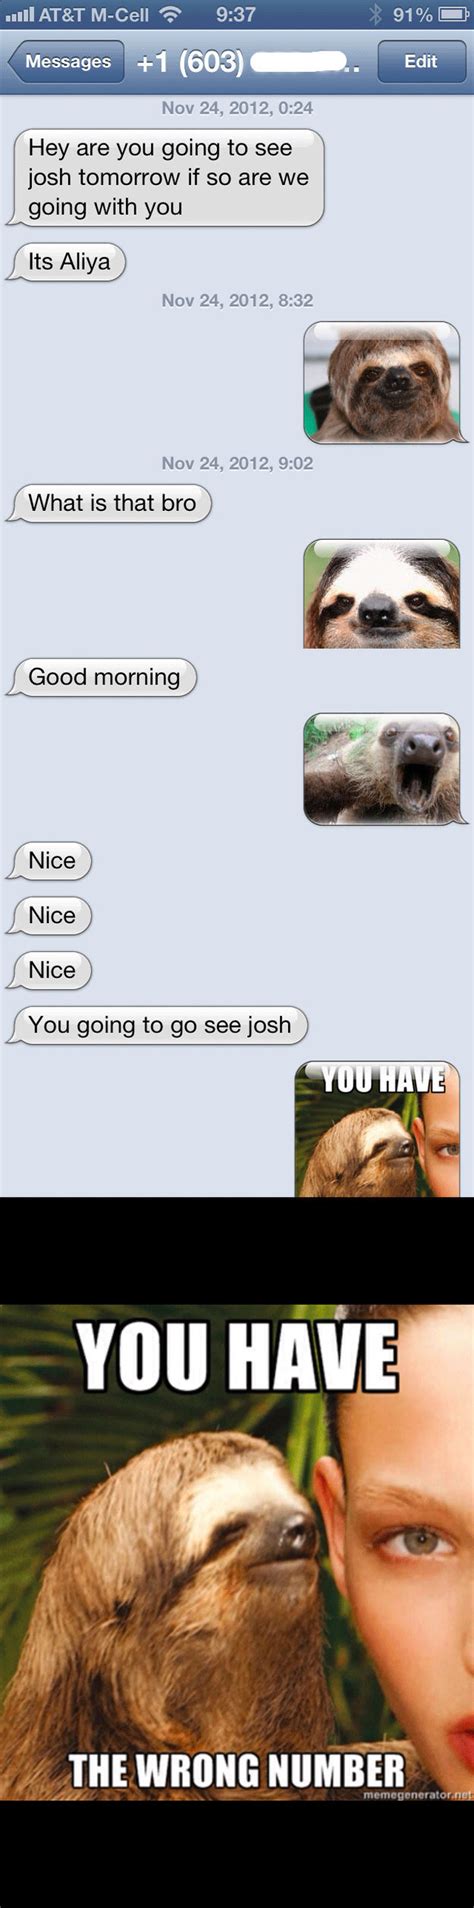 Hilarious Responses To Wrong Number Texts 25 Pics